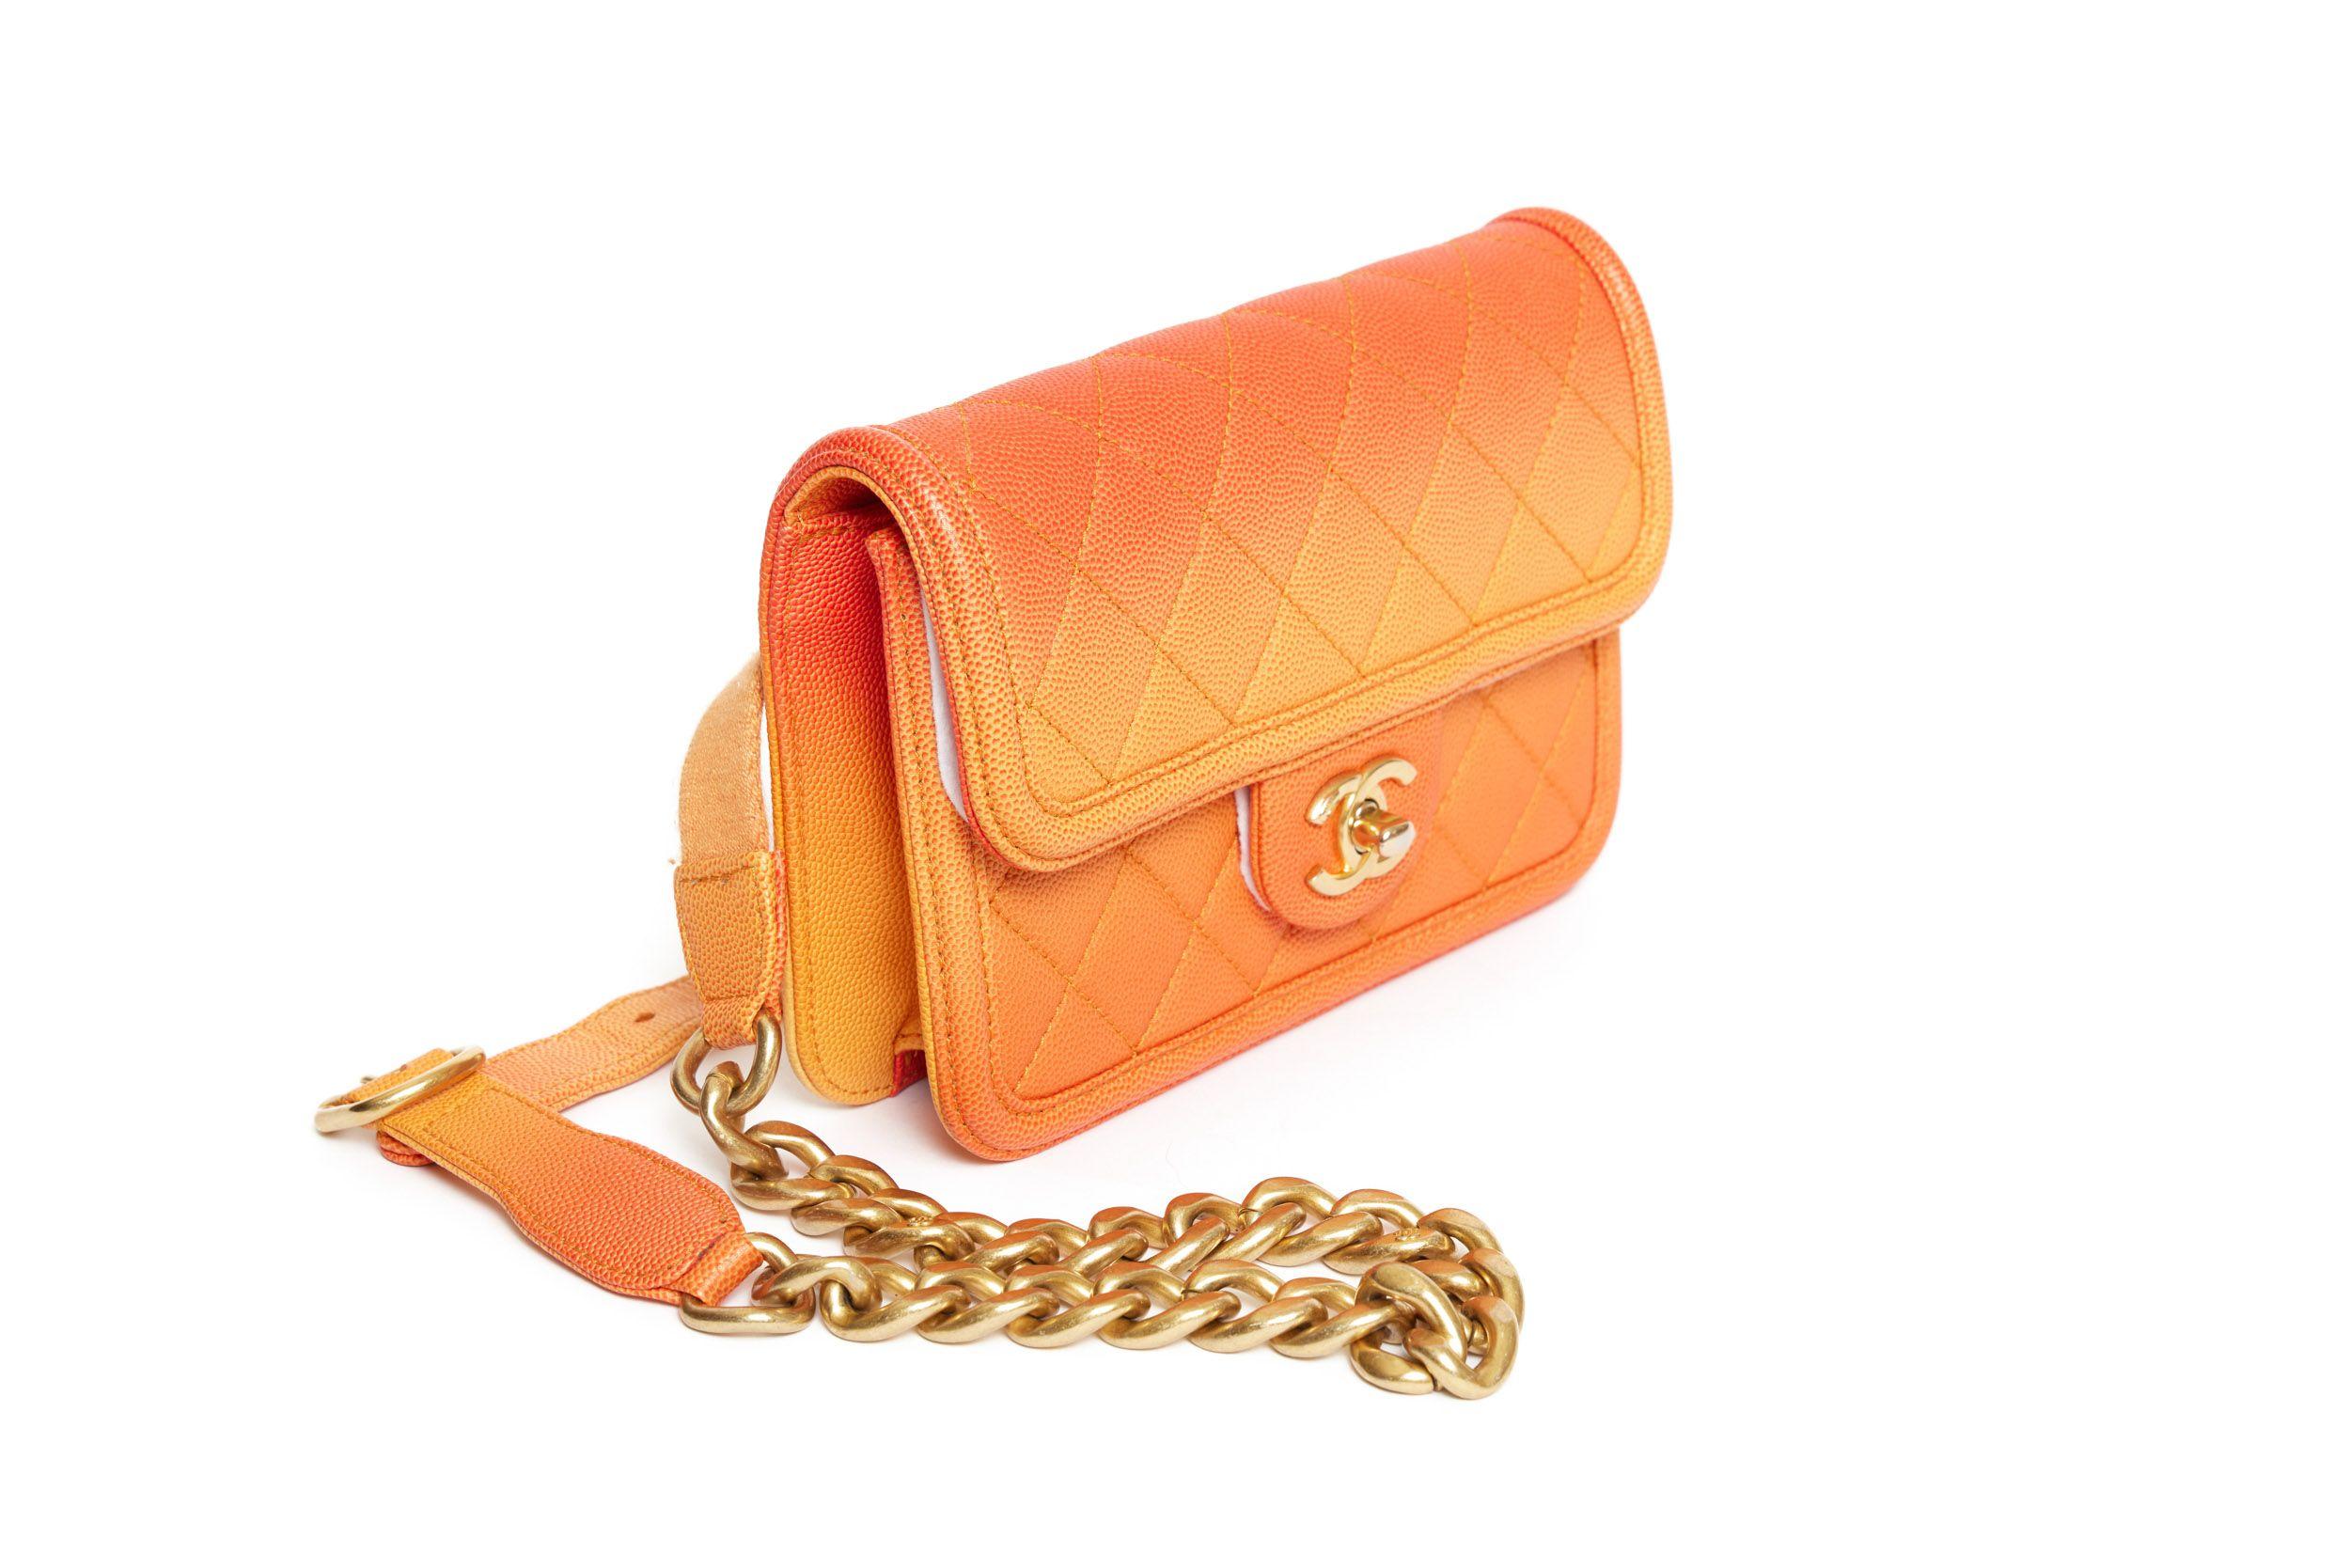 Chanel Waist Boy Bag in orange from the 2019 cruise collection. The year code is 27. The belt is 95' and it's a gold chain with little CC logos on it. The hardware of the bag is gold as well. The interior is fabric and has one zip pocket. The bag is